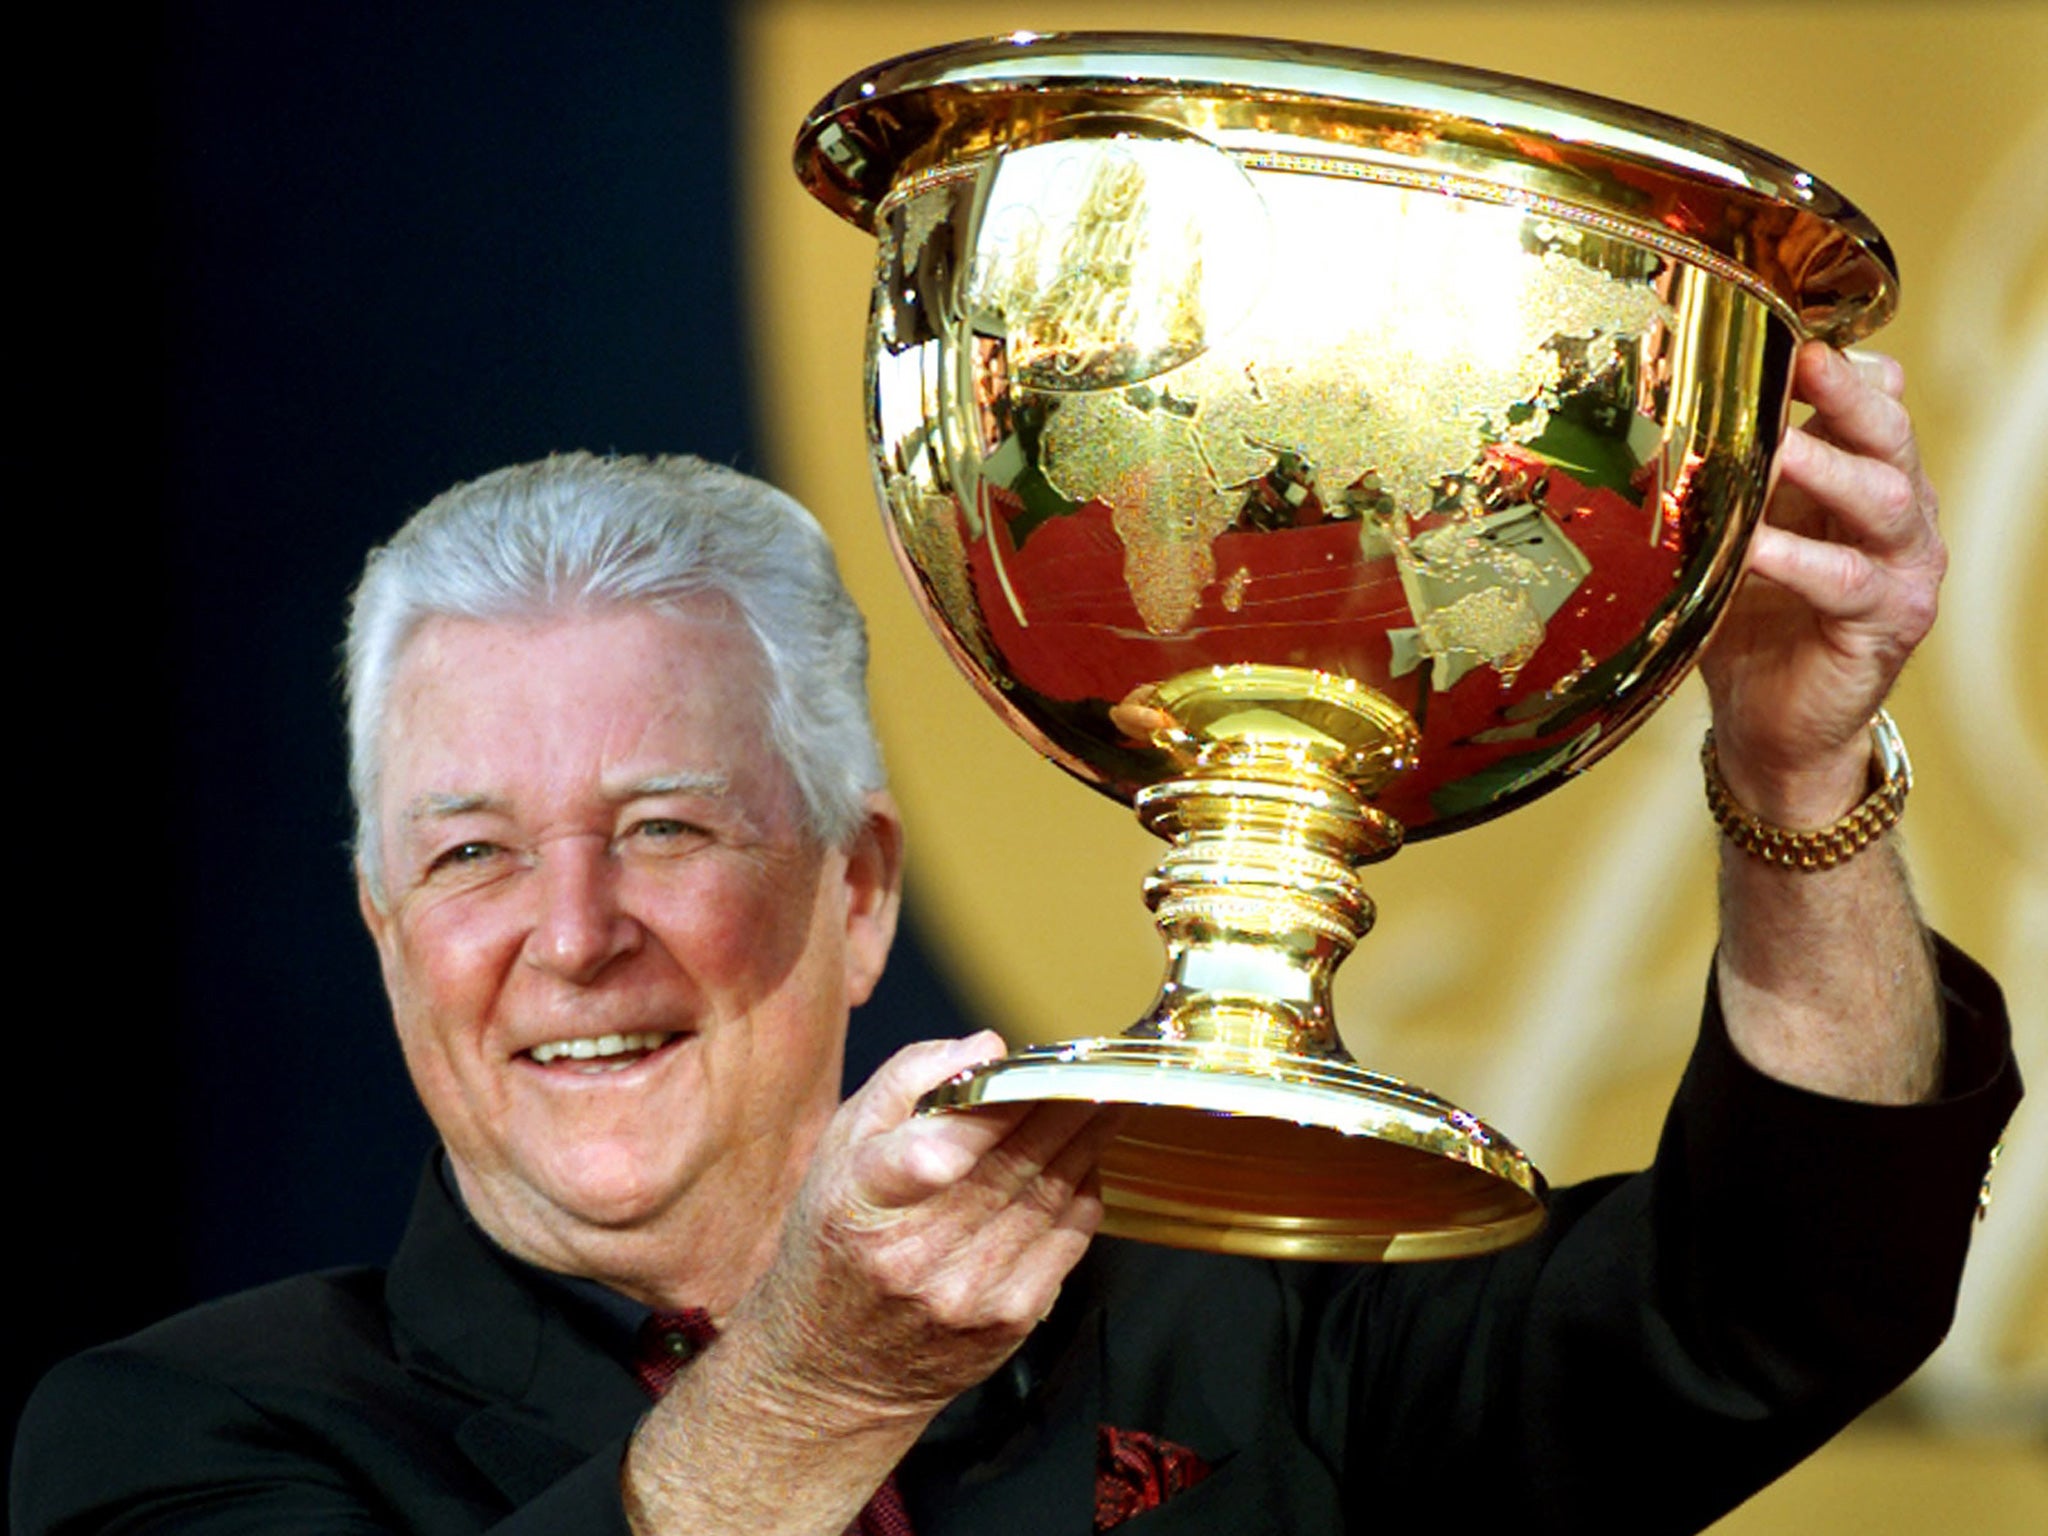 Venturi with the Presidents Cup in 2000, when he was the winning captain